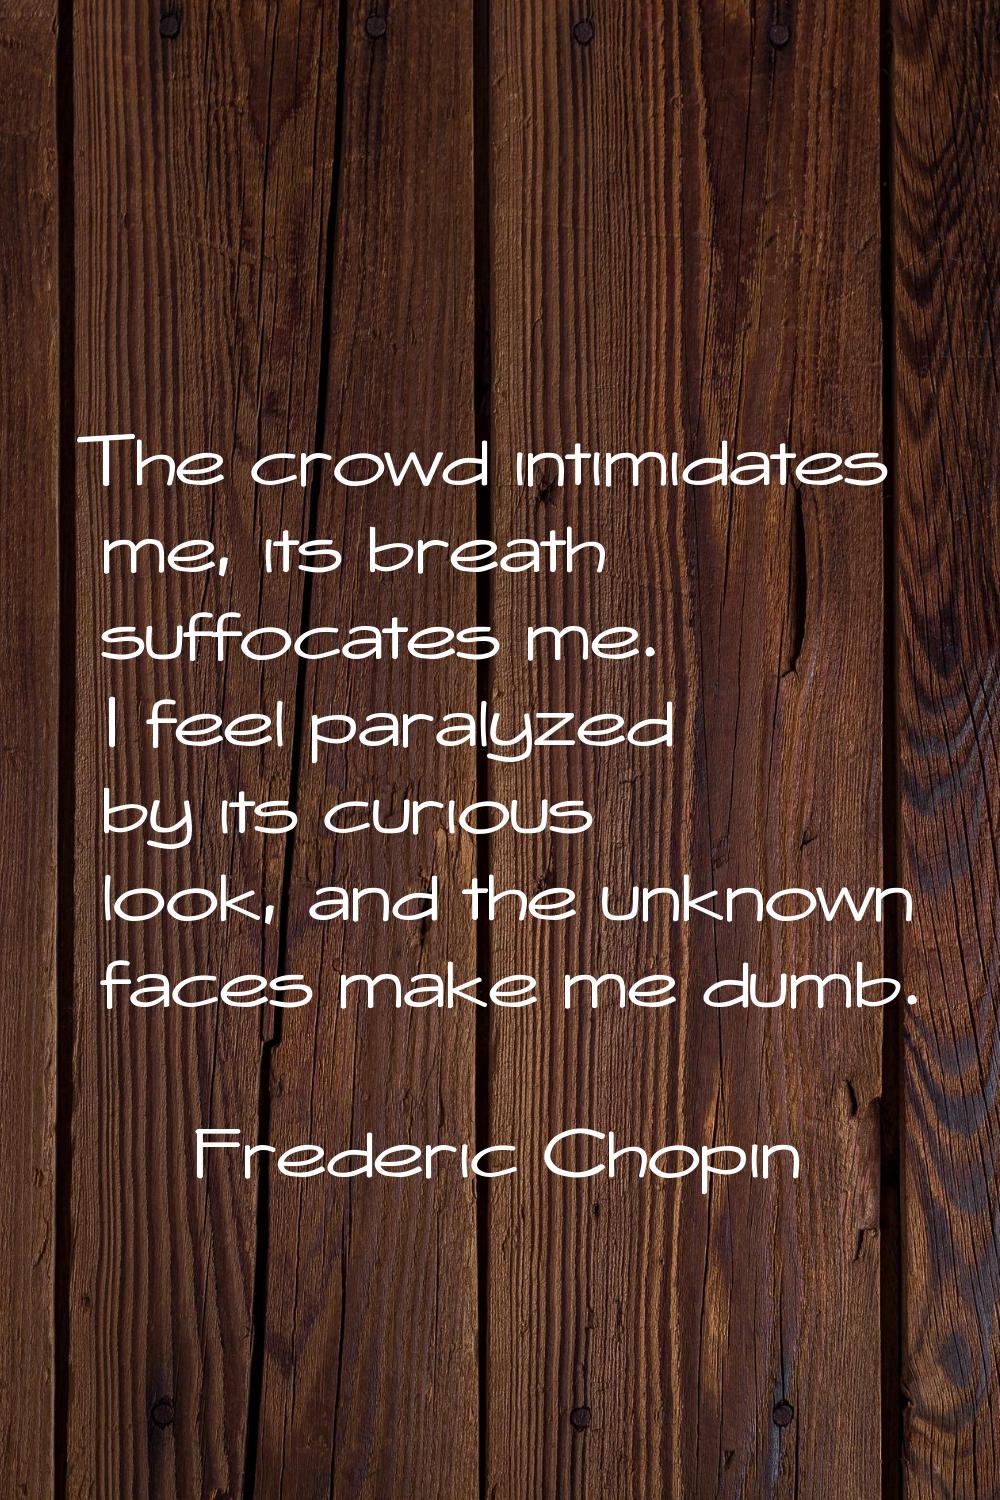 The crowd intimidates me, its breath suffocates me. I feel paralyzed by its curious look, and the u